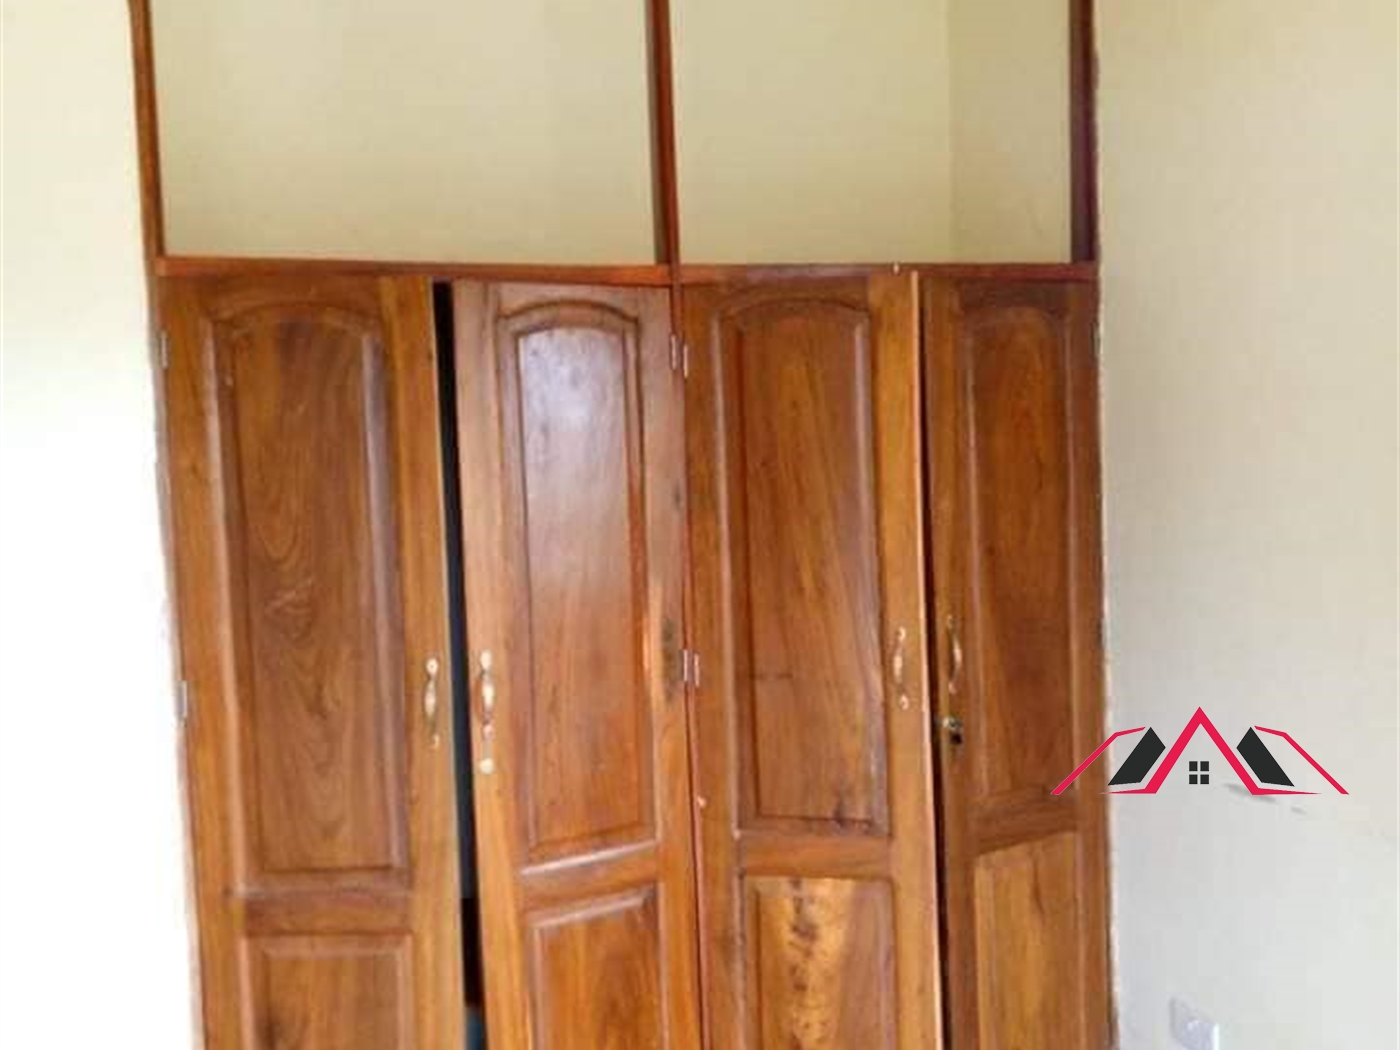 Apartment for rent in Mpererewe Kampala